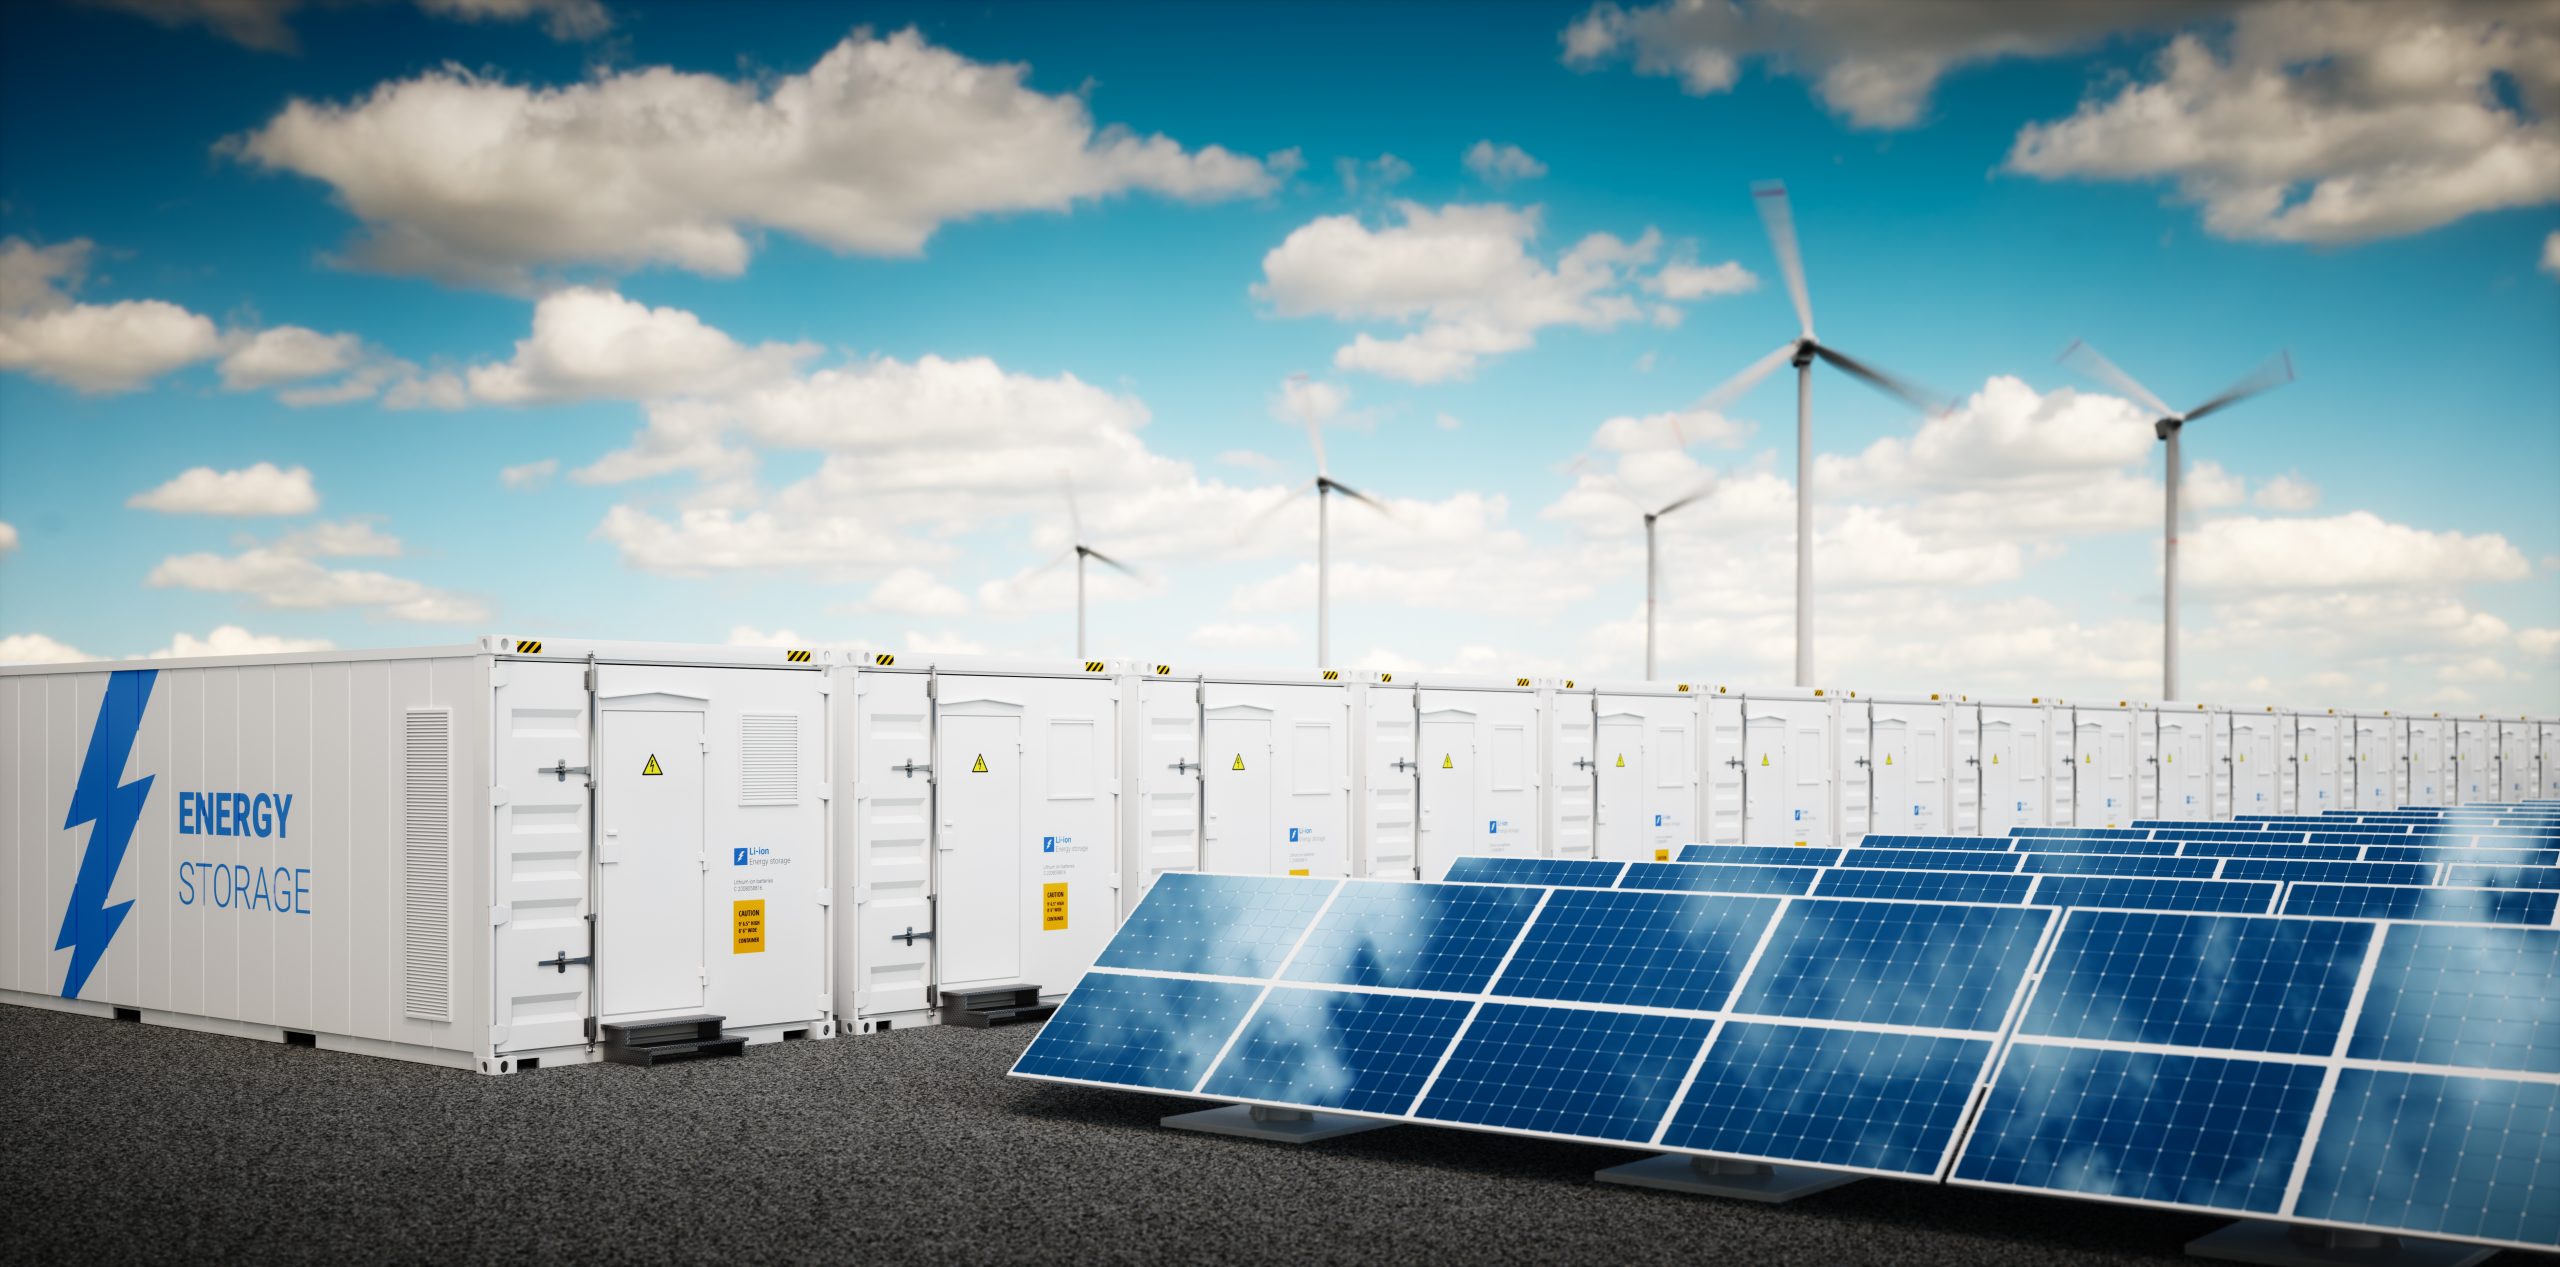 Greece to announce tender for energy storage within the week